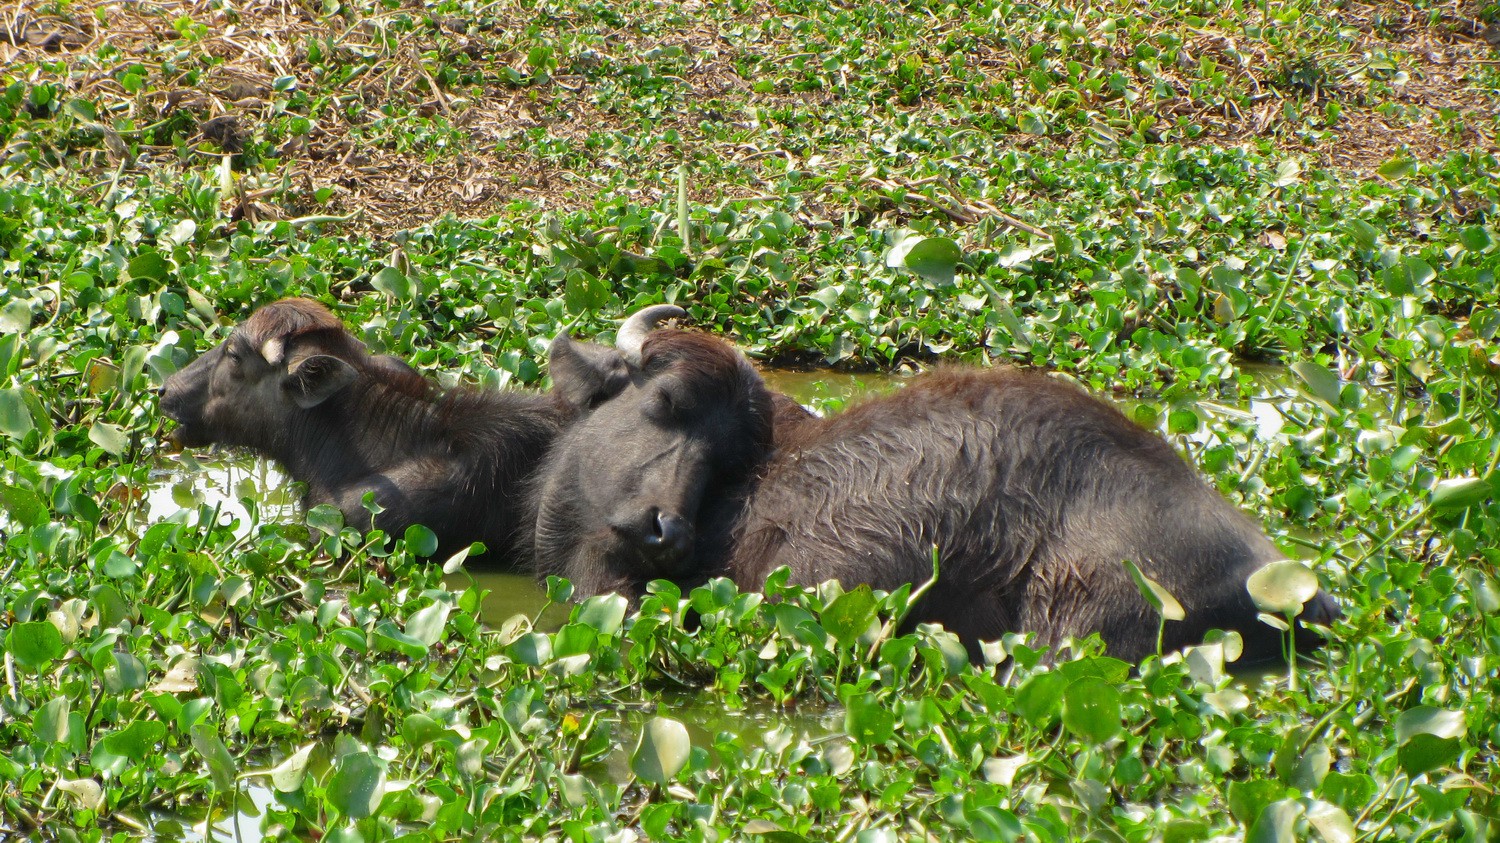 Also the Buffalos are lazy in the midday heat